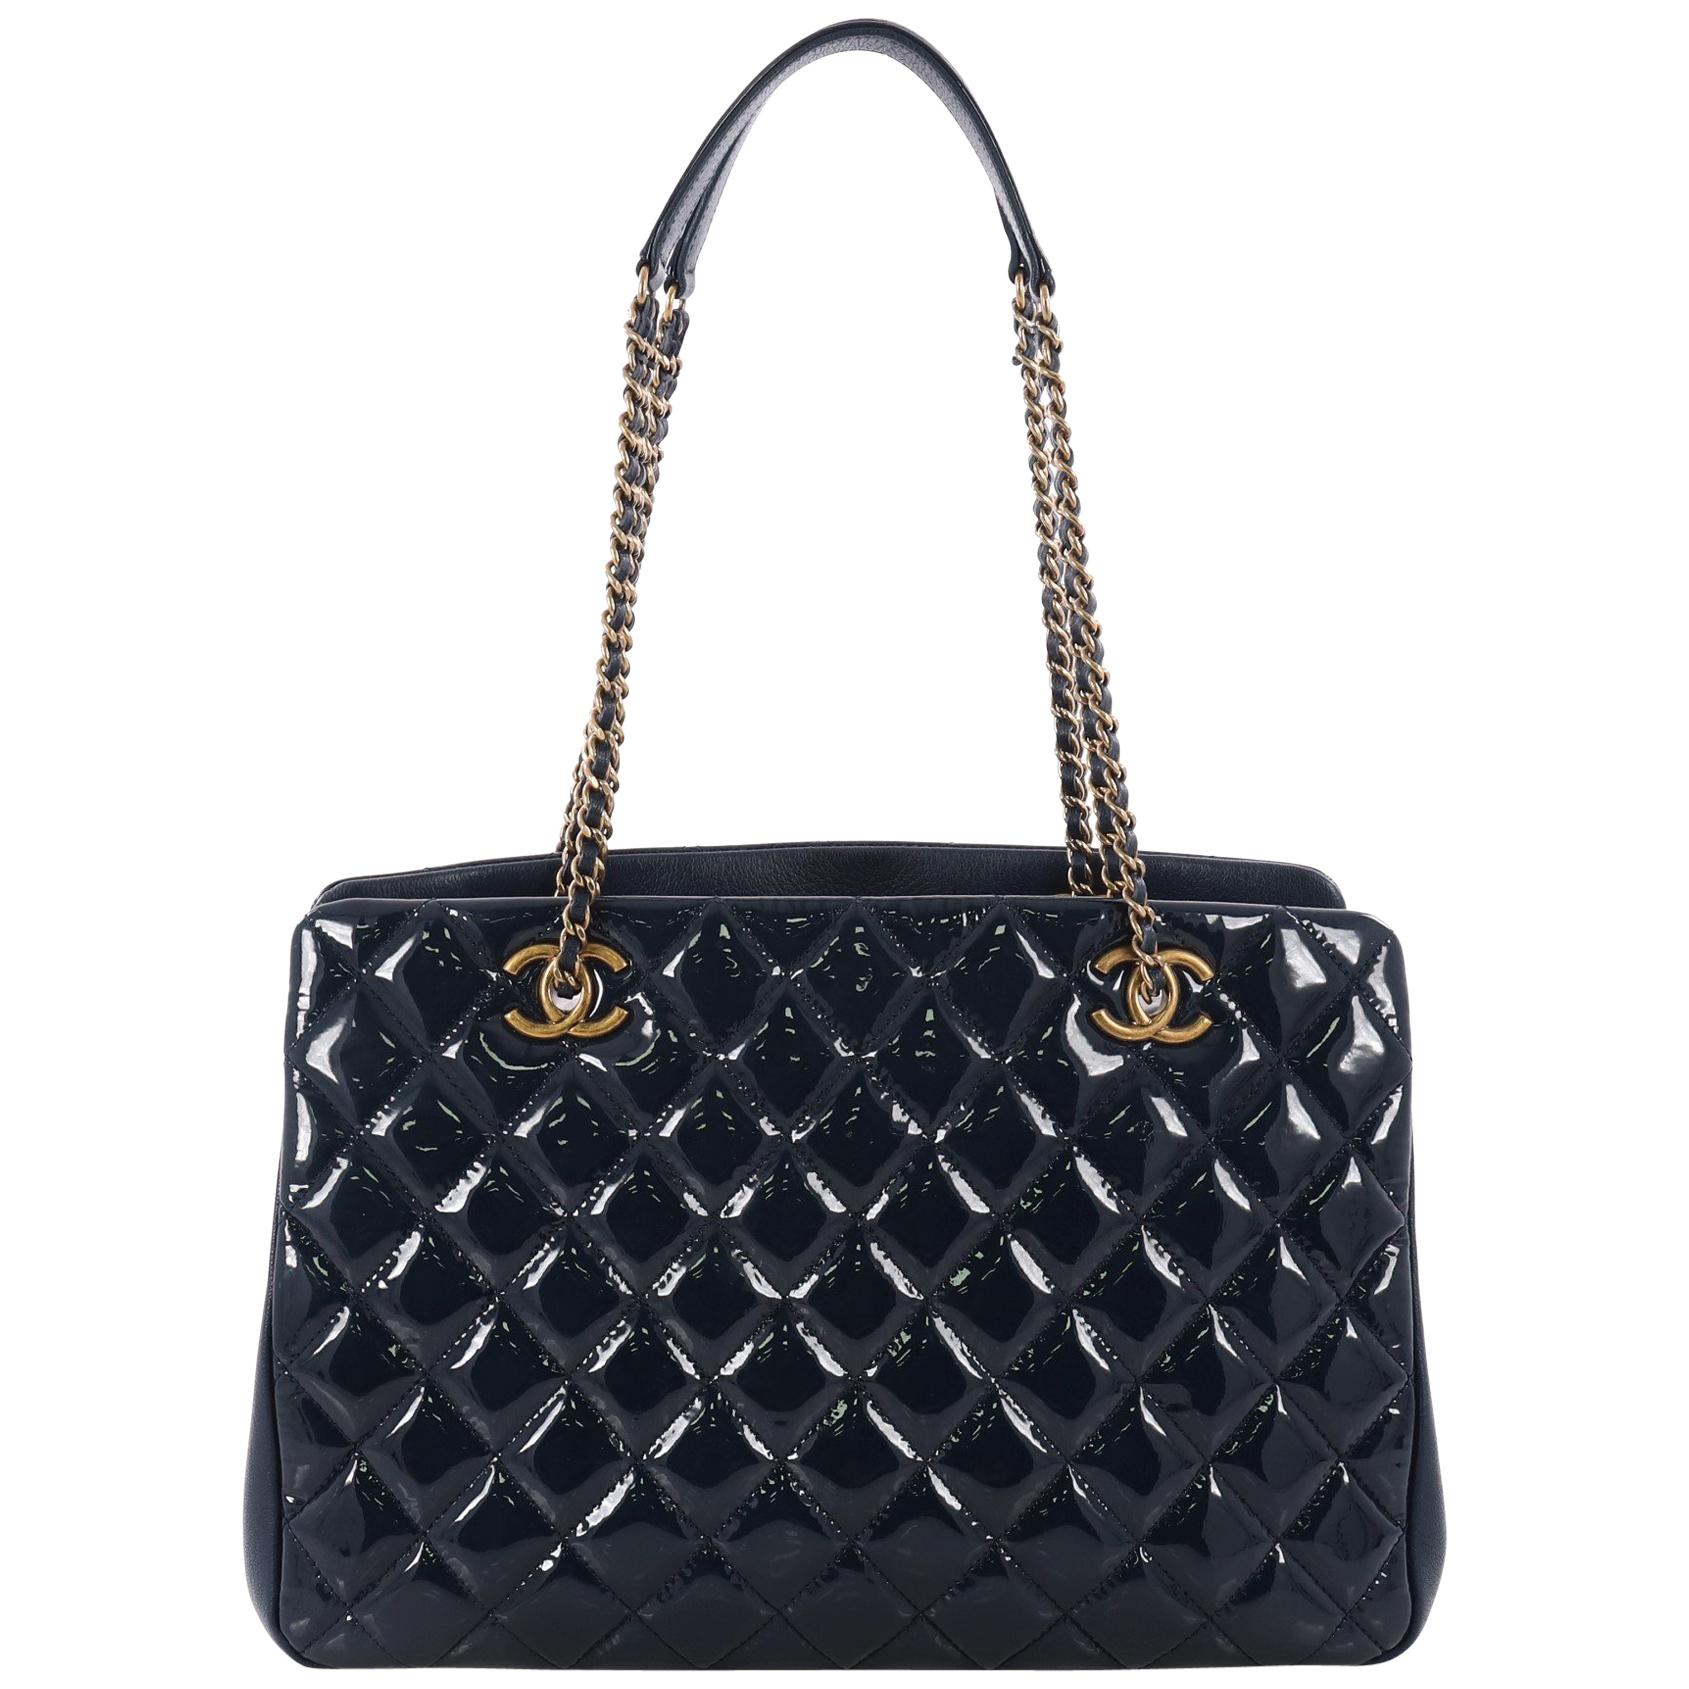 Chanel Eyelet Tote Quilted Patent Medium